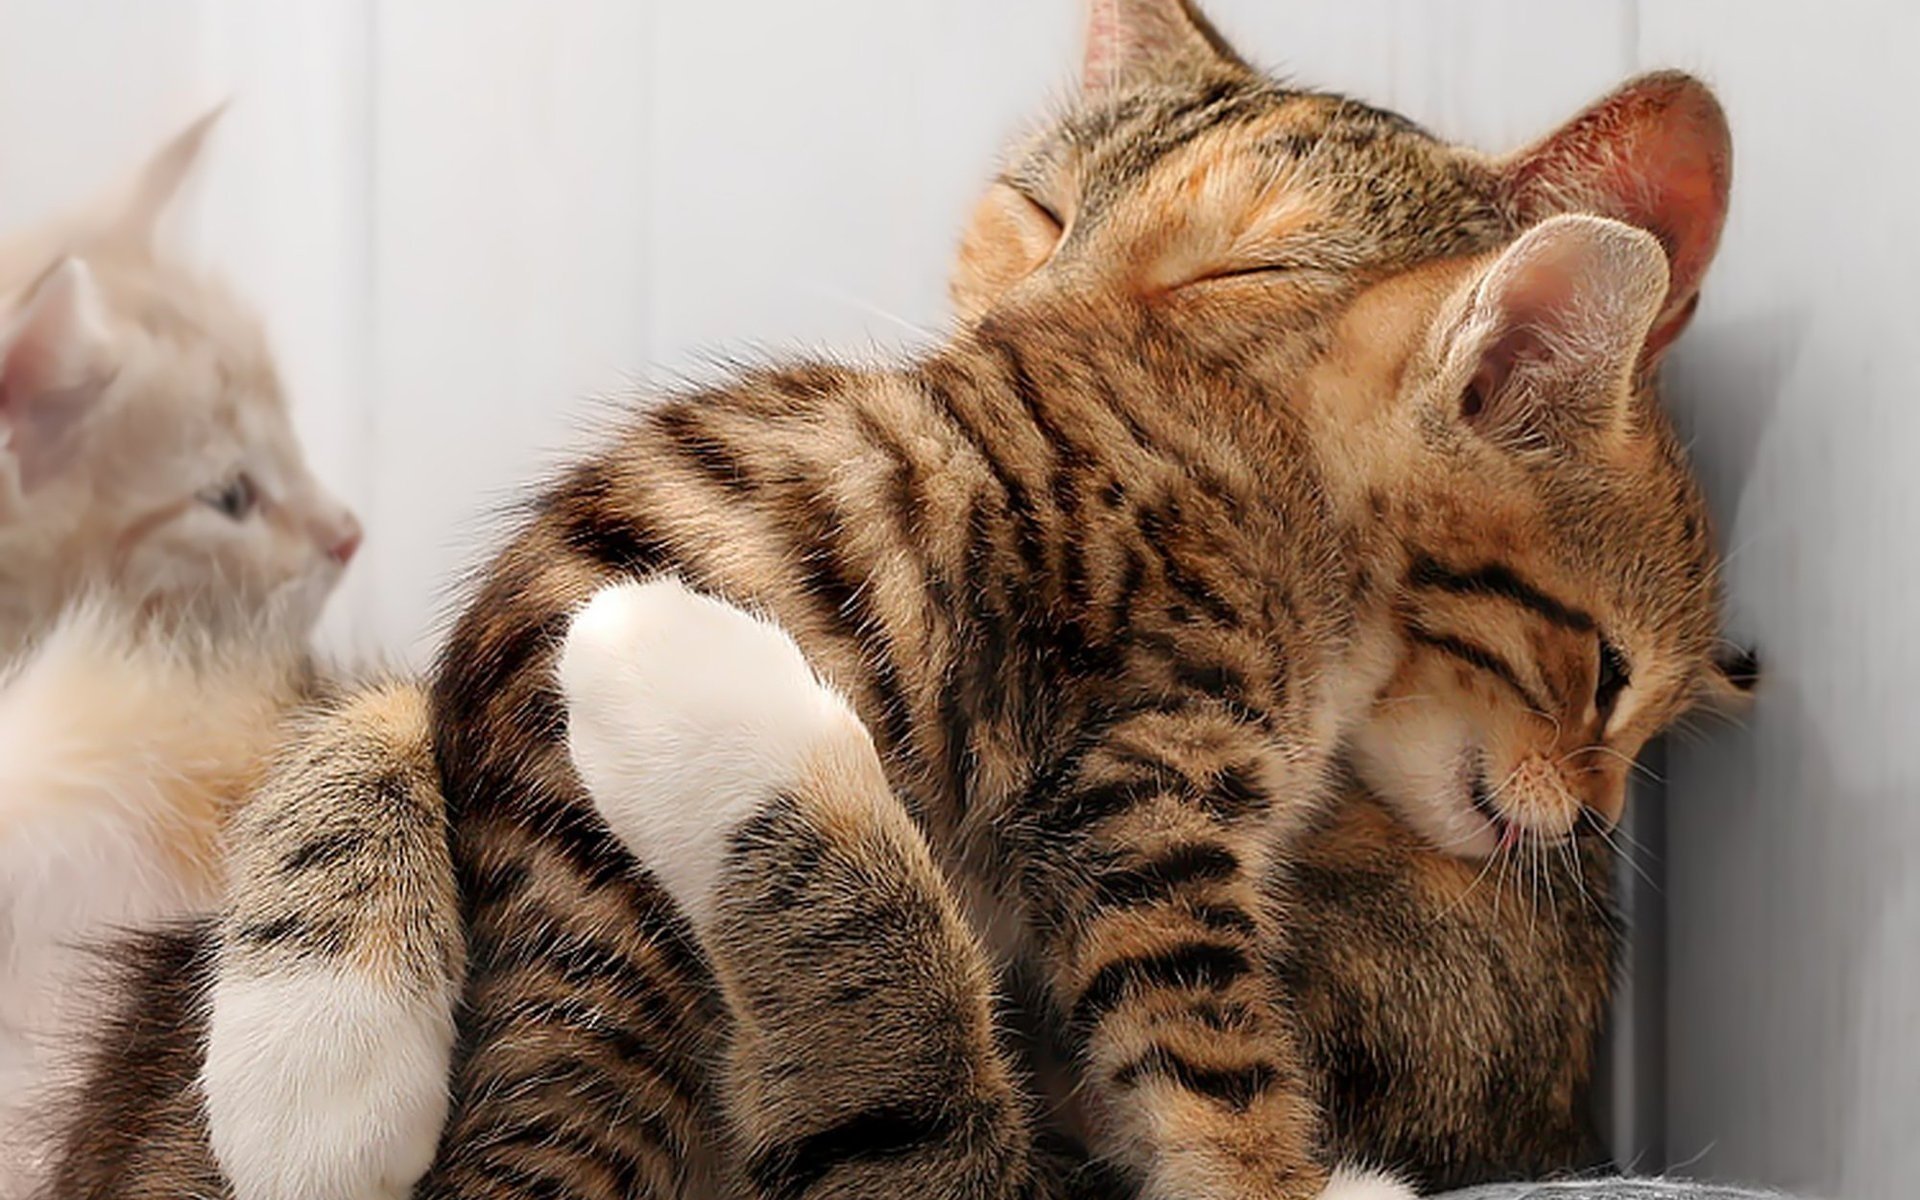 loving cats with kittens. What kind of people love cats? | Food ...